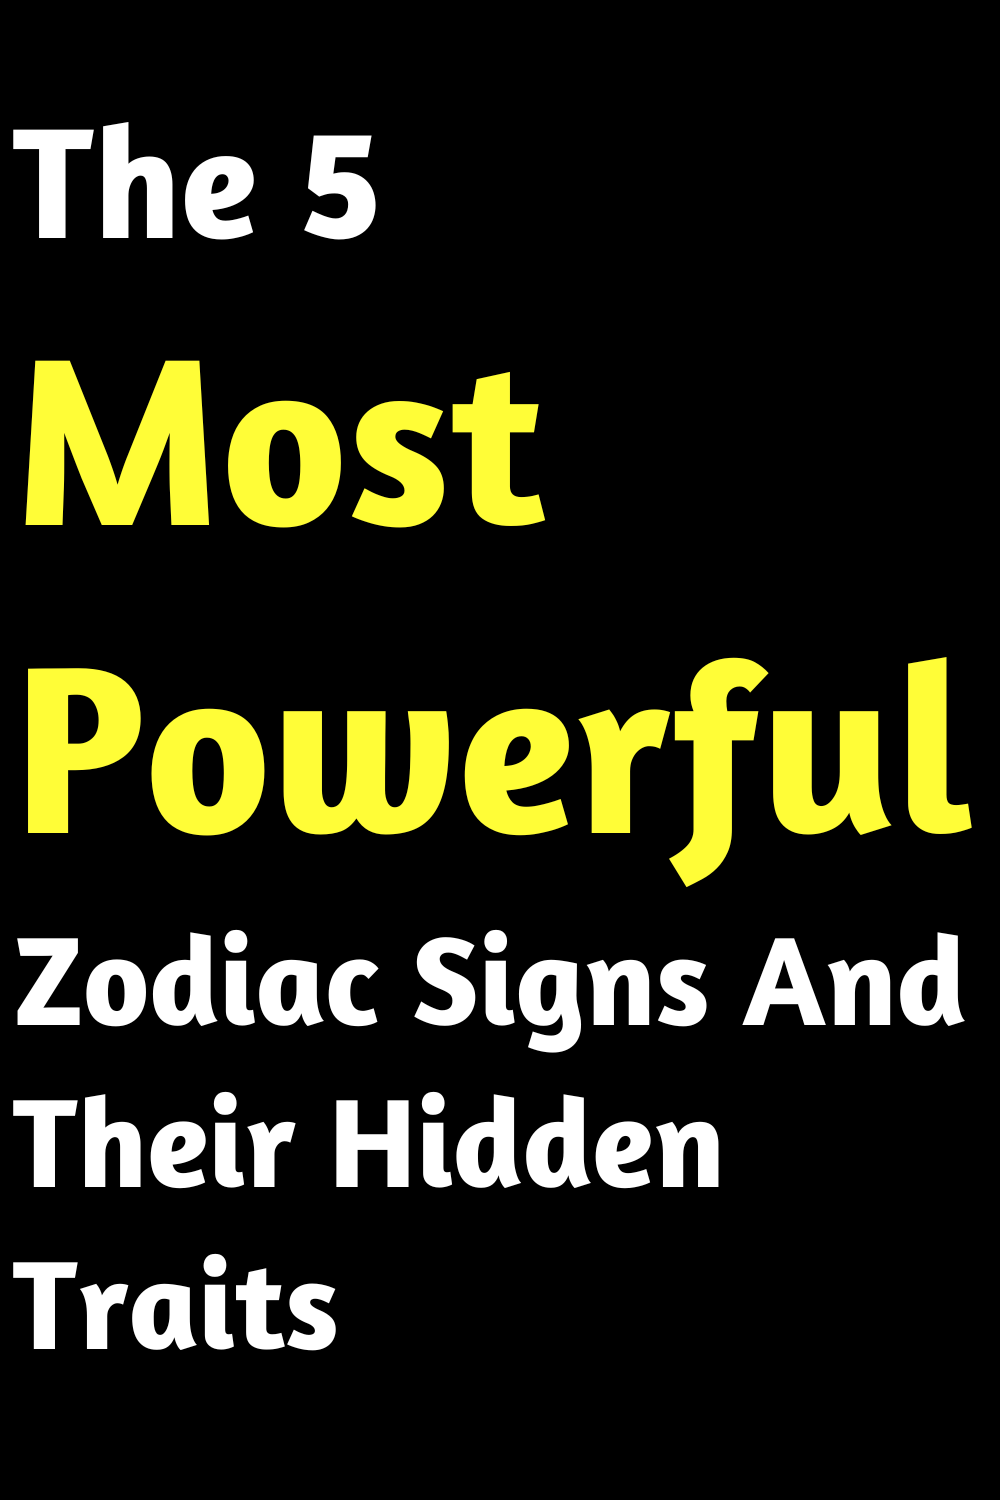 The 5 Most Powerful Zodiac Signs And Their Hidden Traits